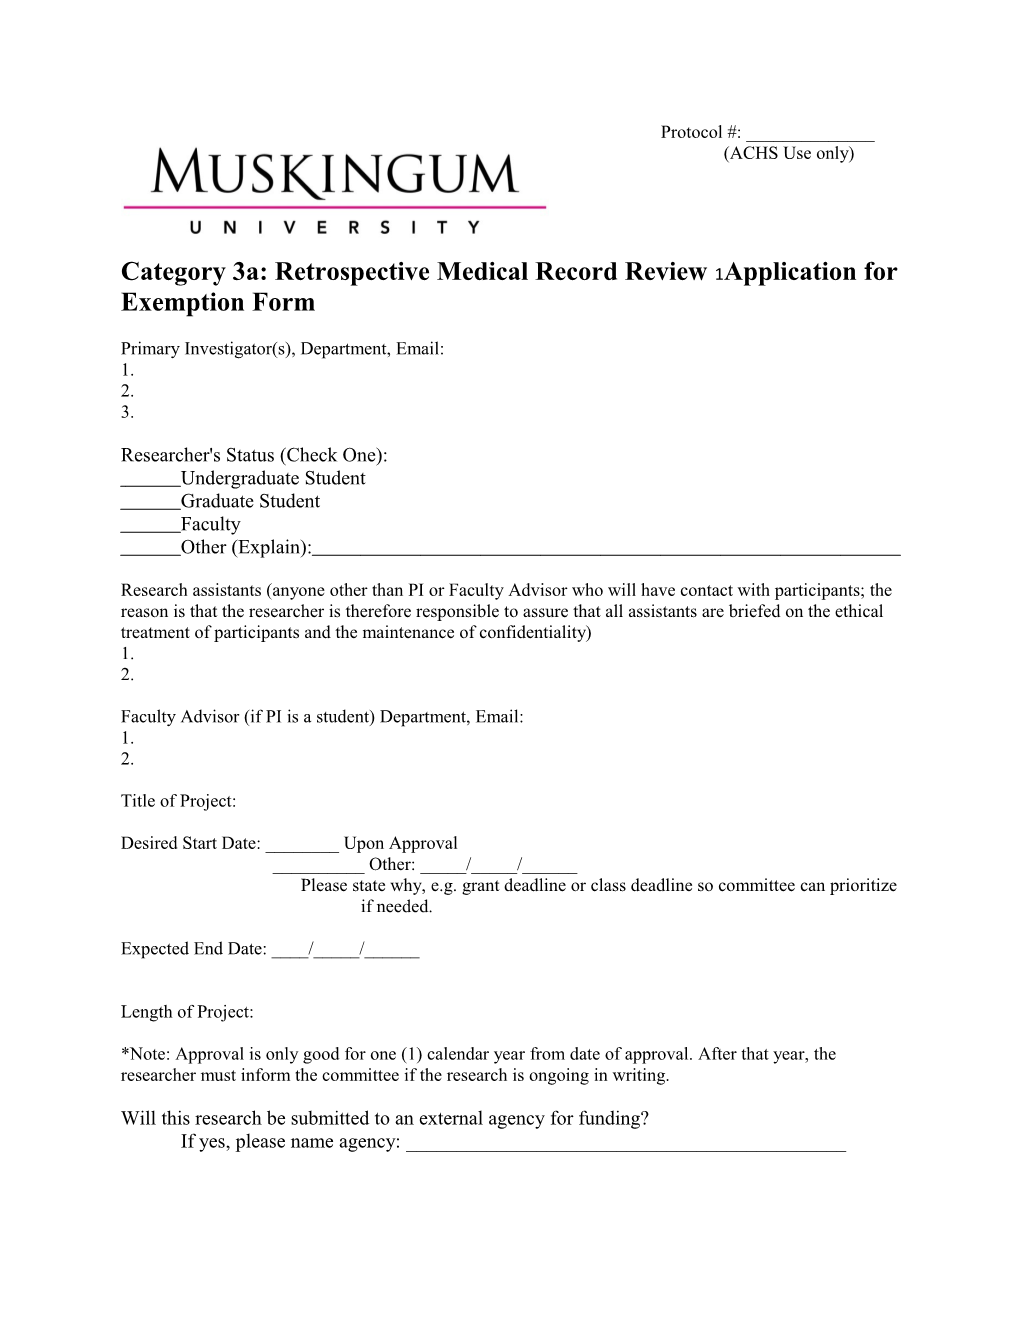 Category 3A: Retrospective Medical Record Reviewapplication for Exemption Form